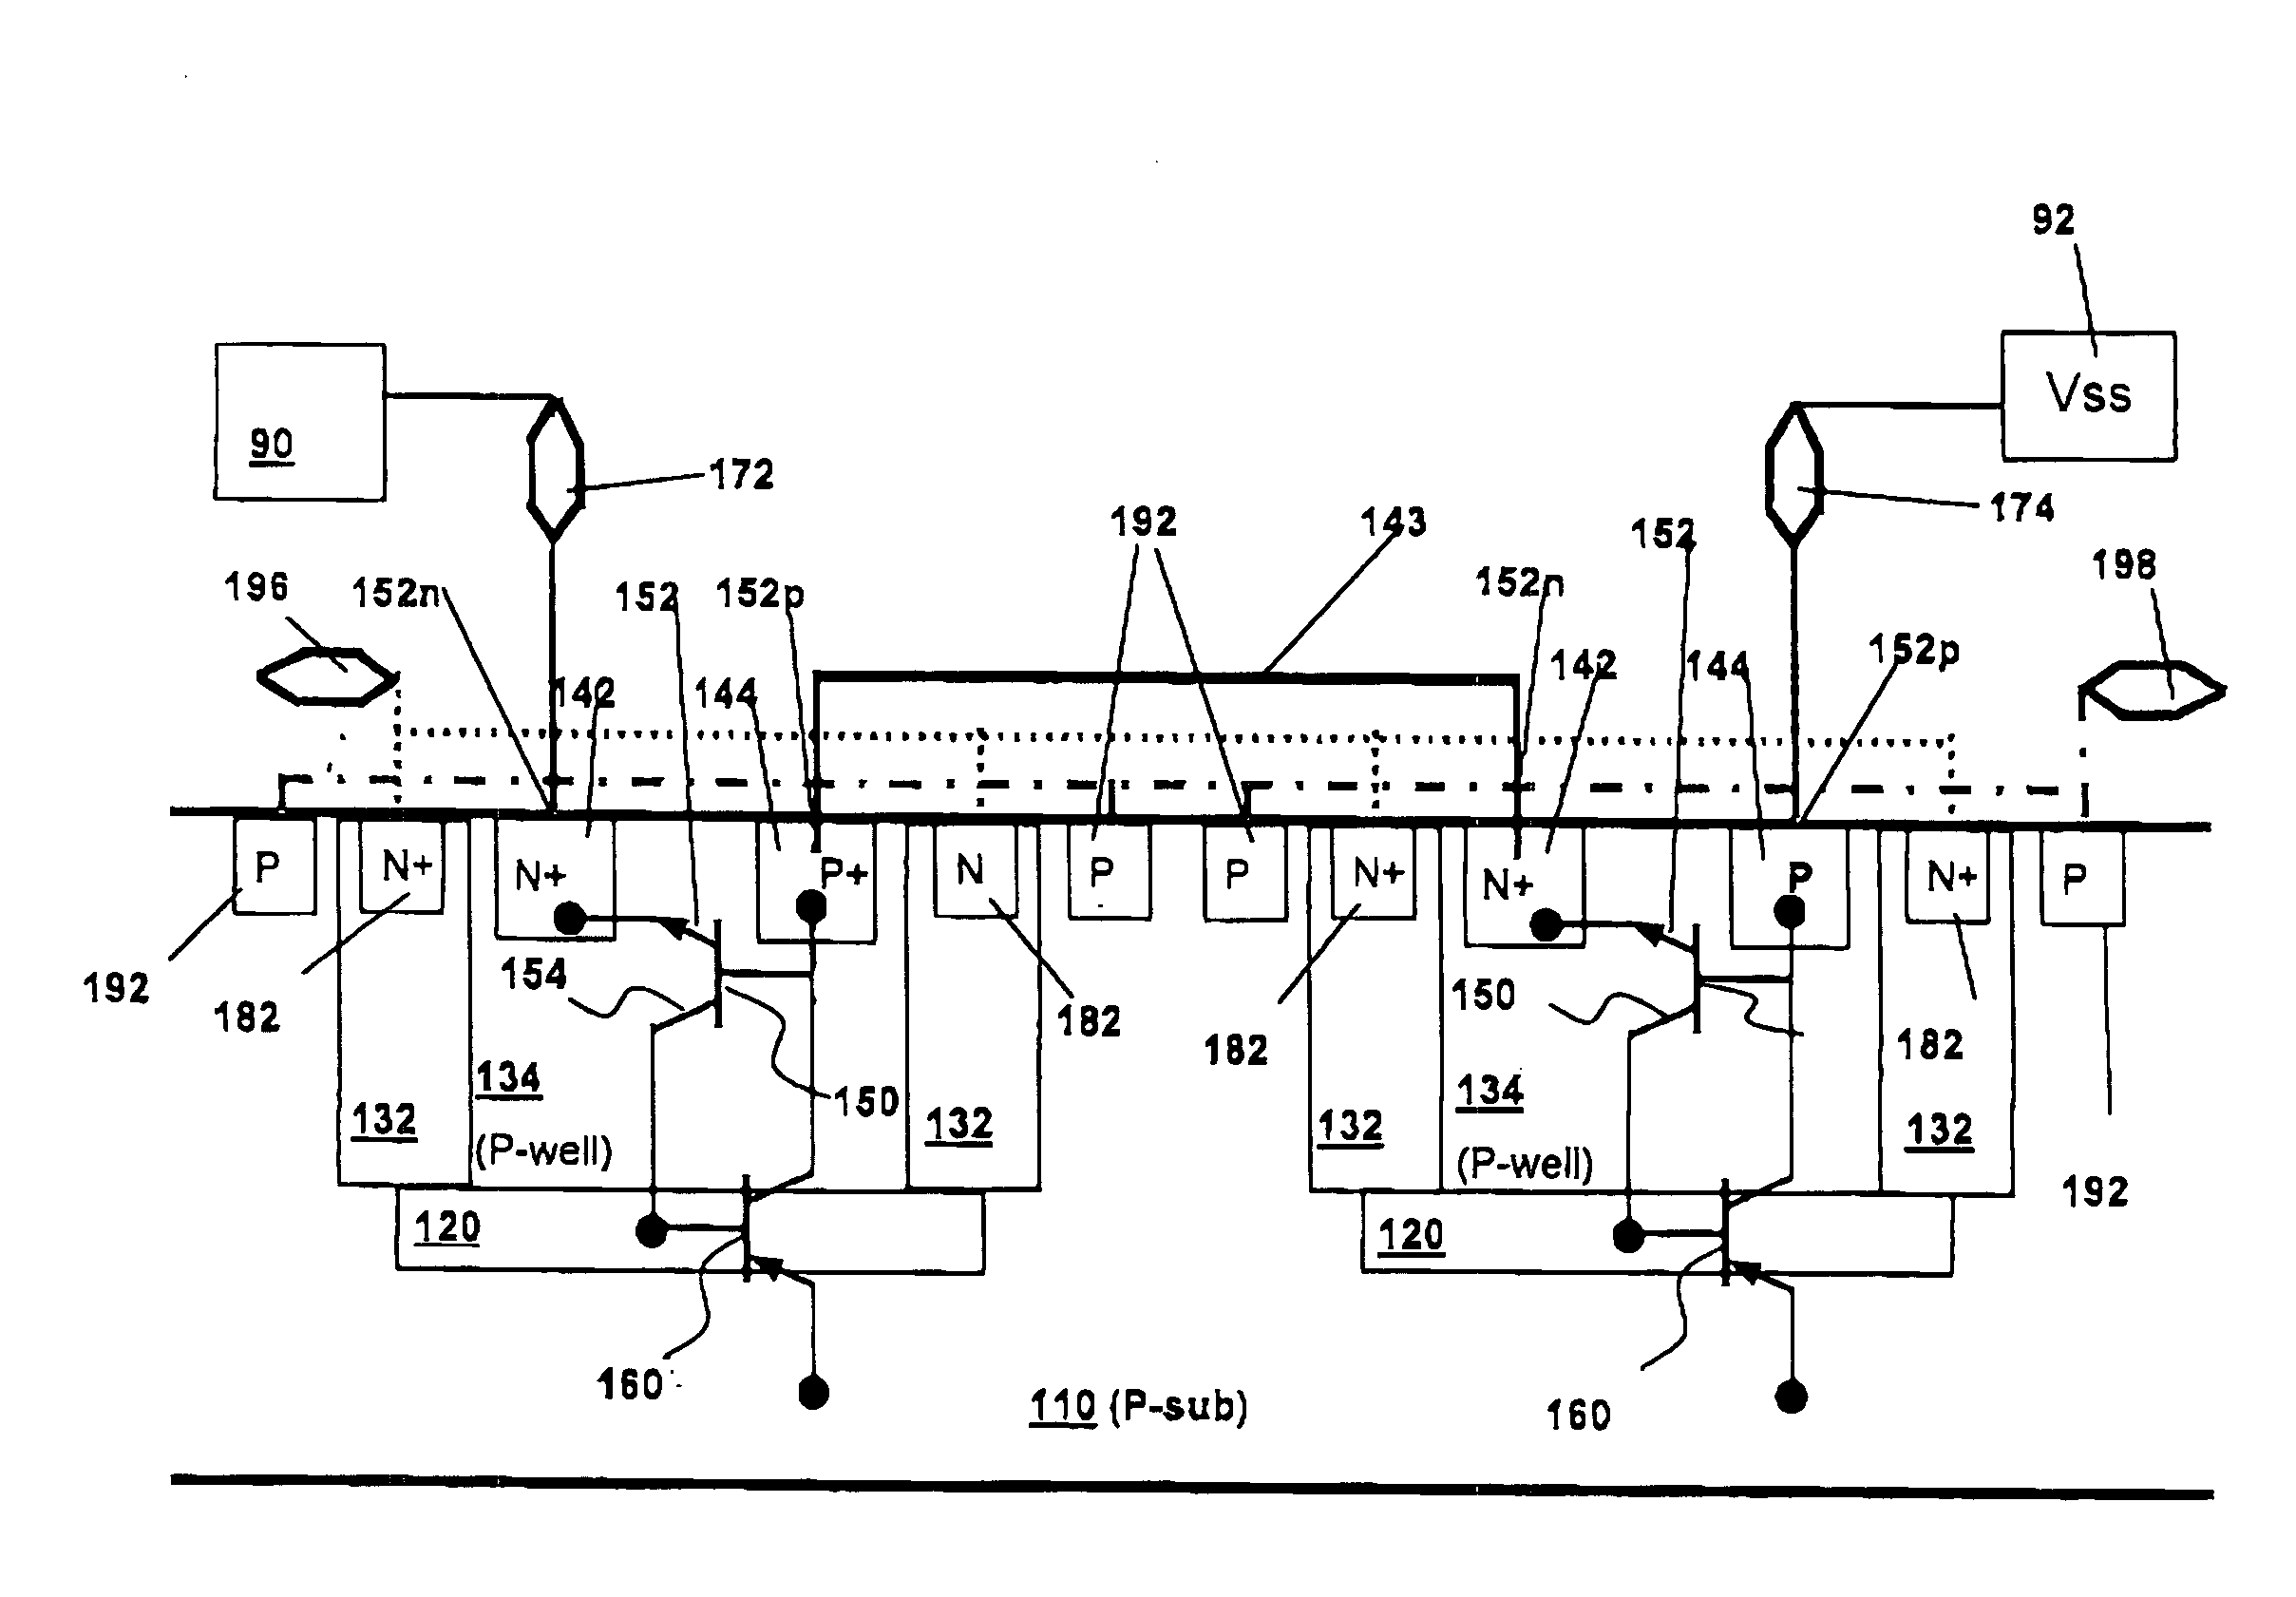 Electrostatic discharge protection for integrated circuit devices